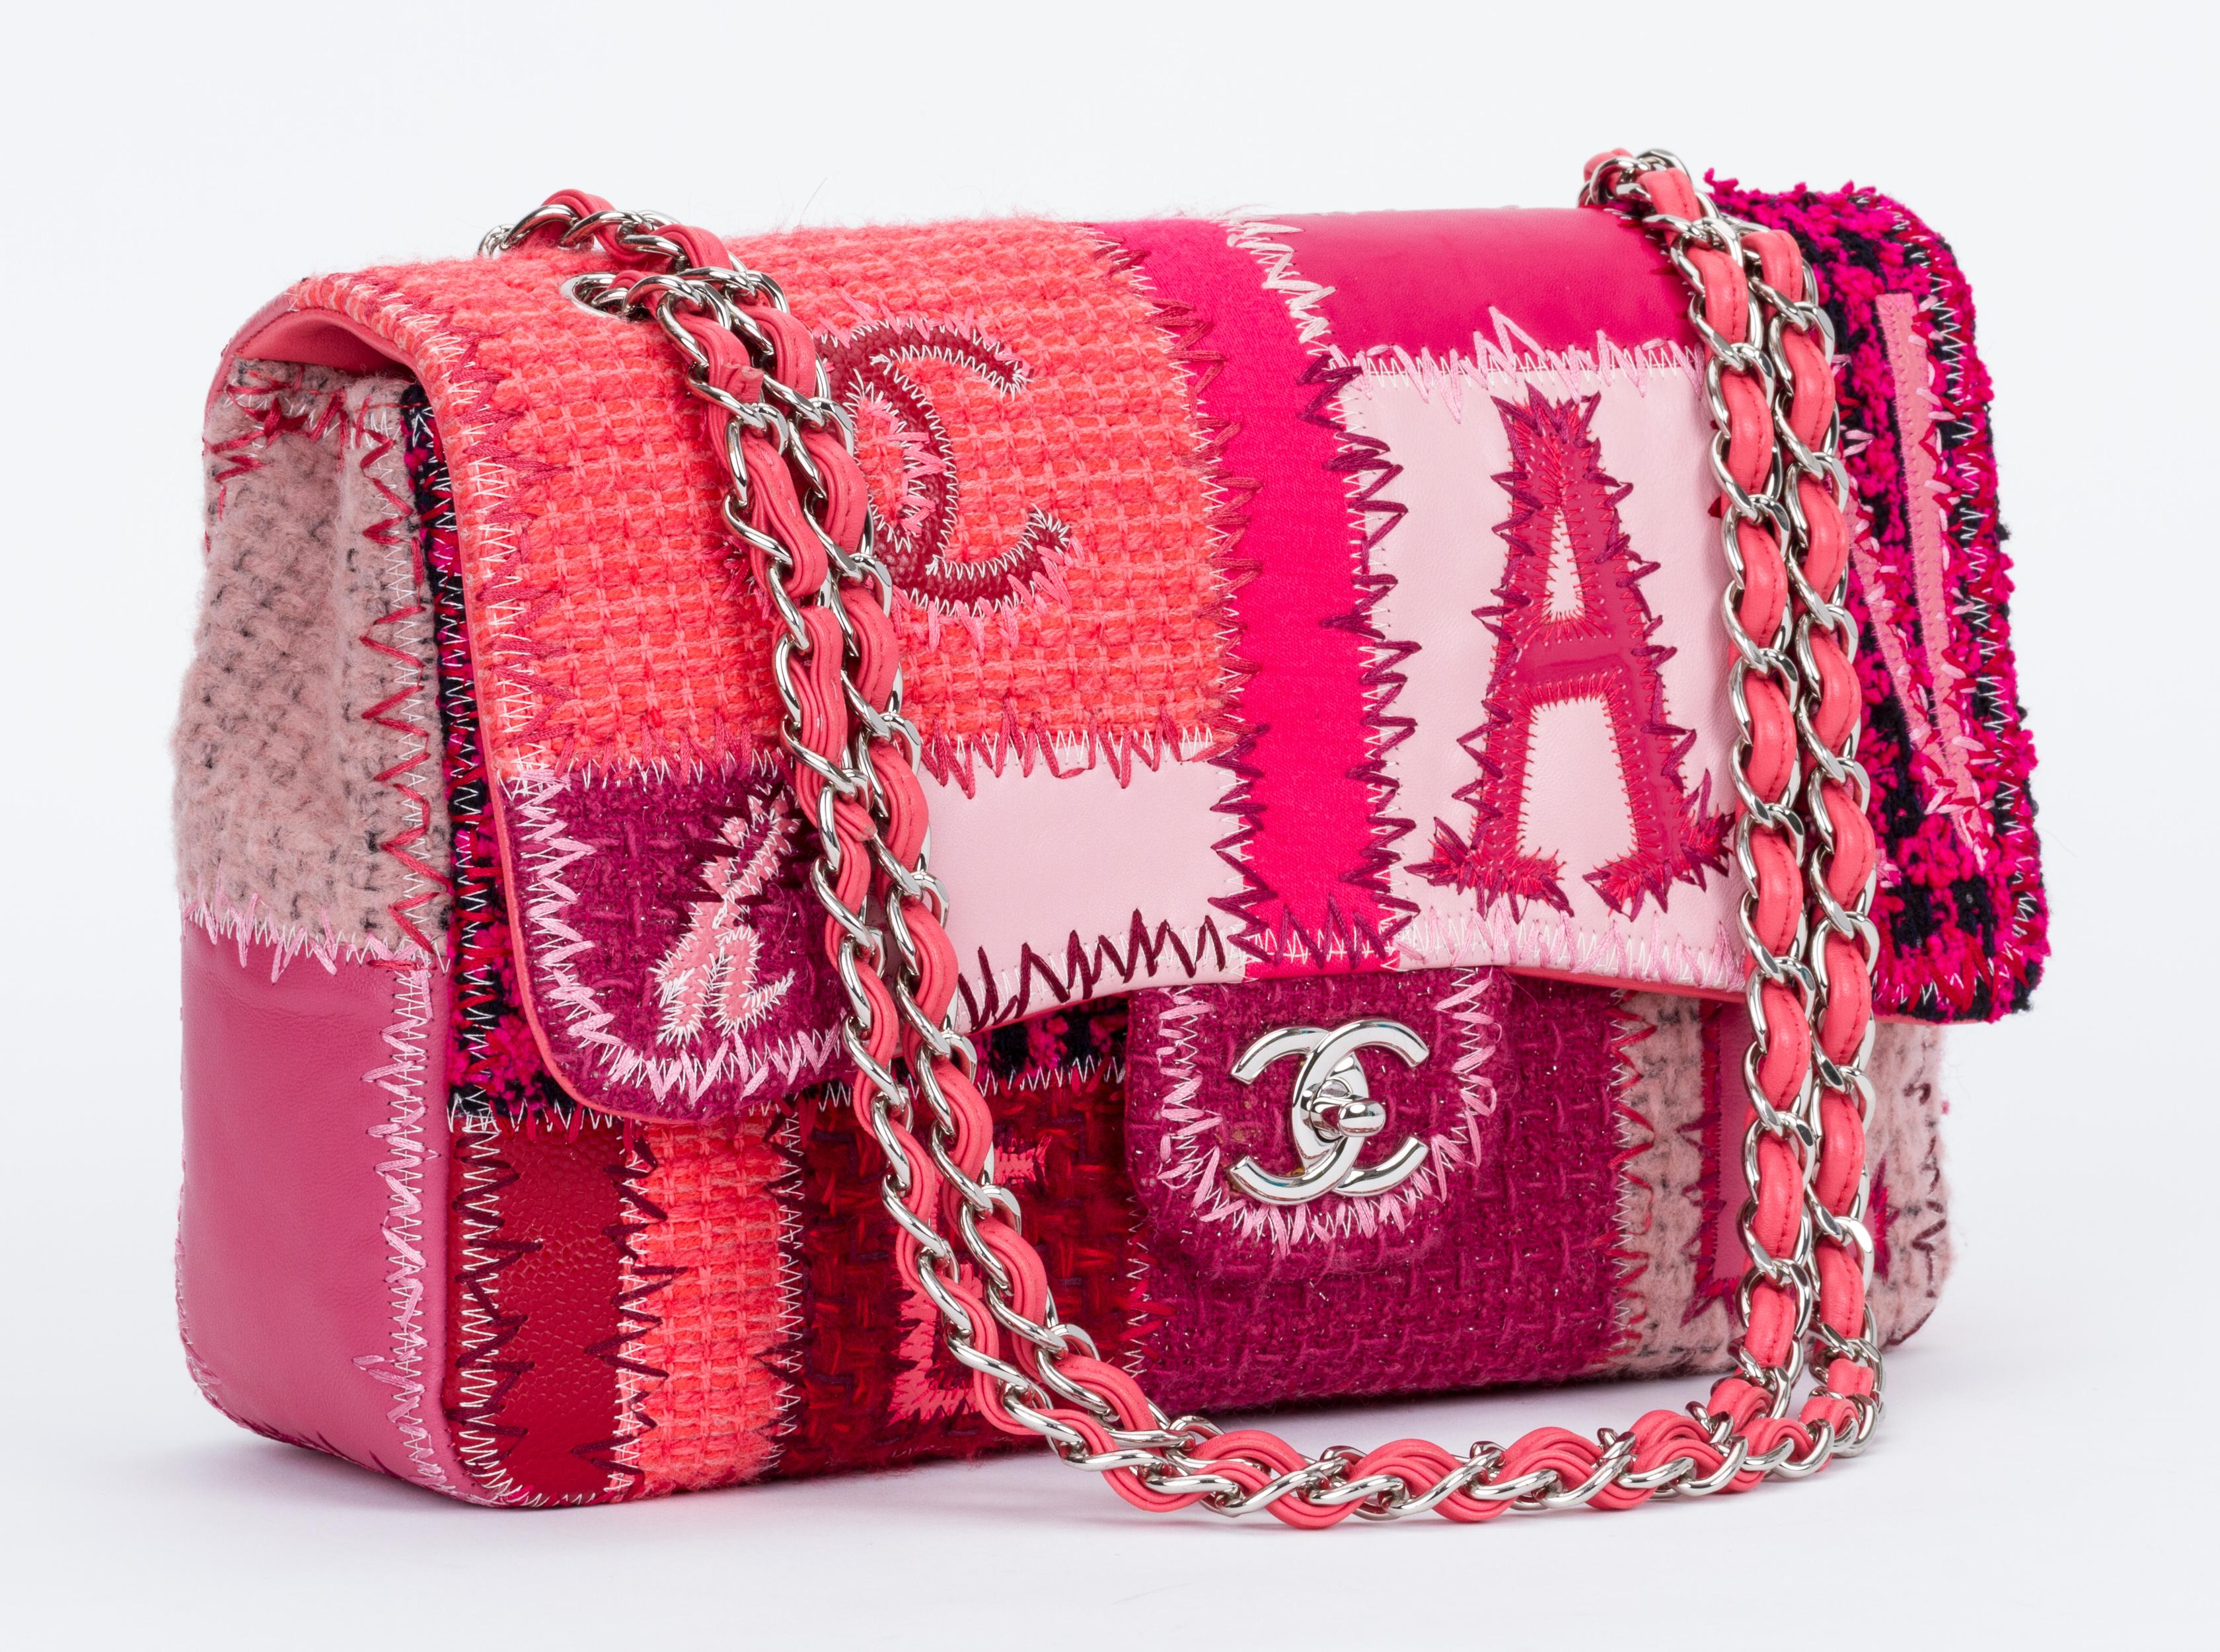 Chanel rare and collectible pink patchwork jumbo single flap with silver tone hardware. New condition. Shoulder drop 11